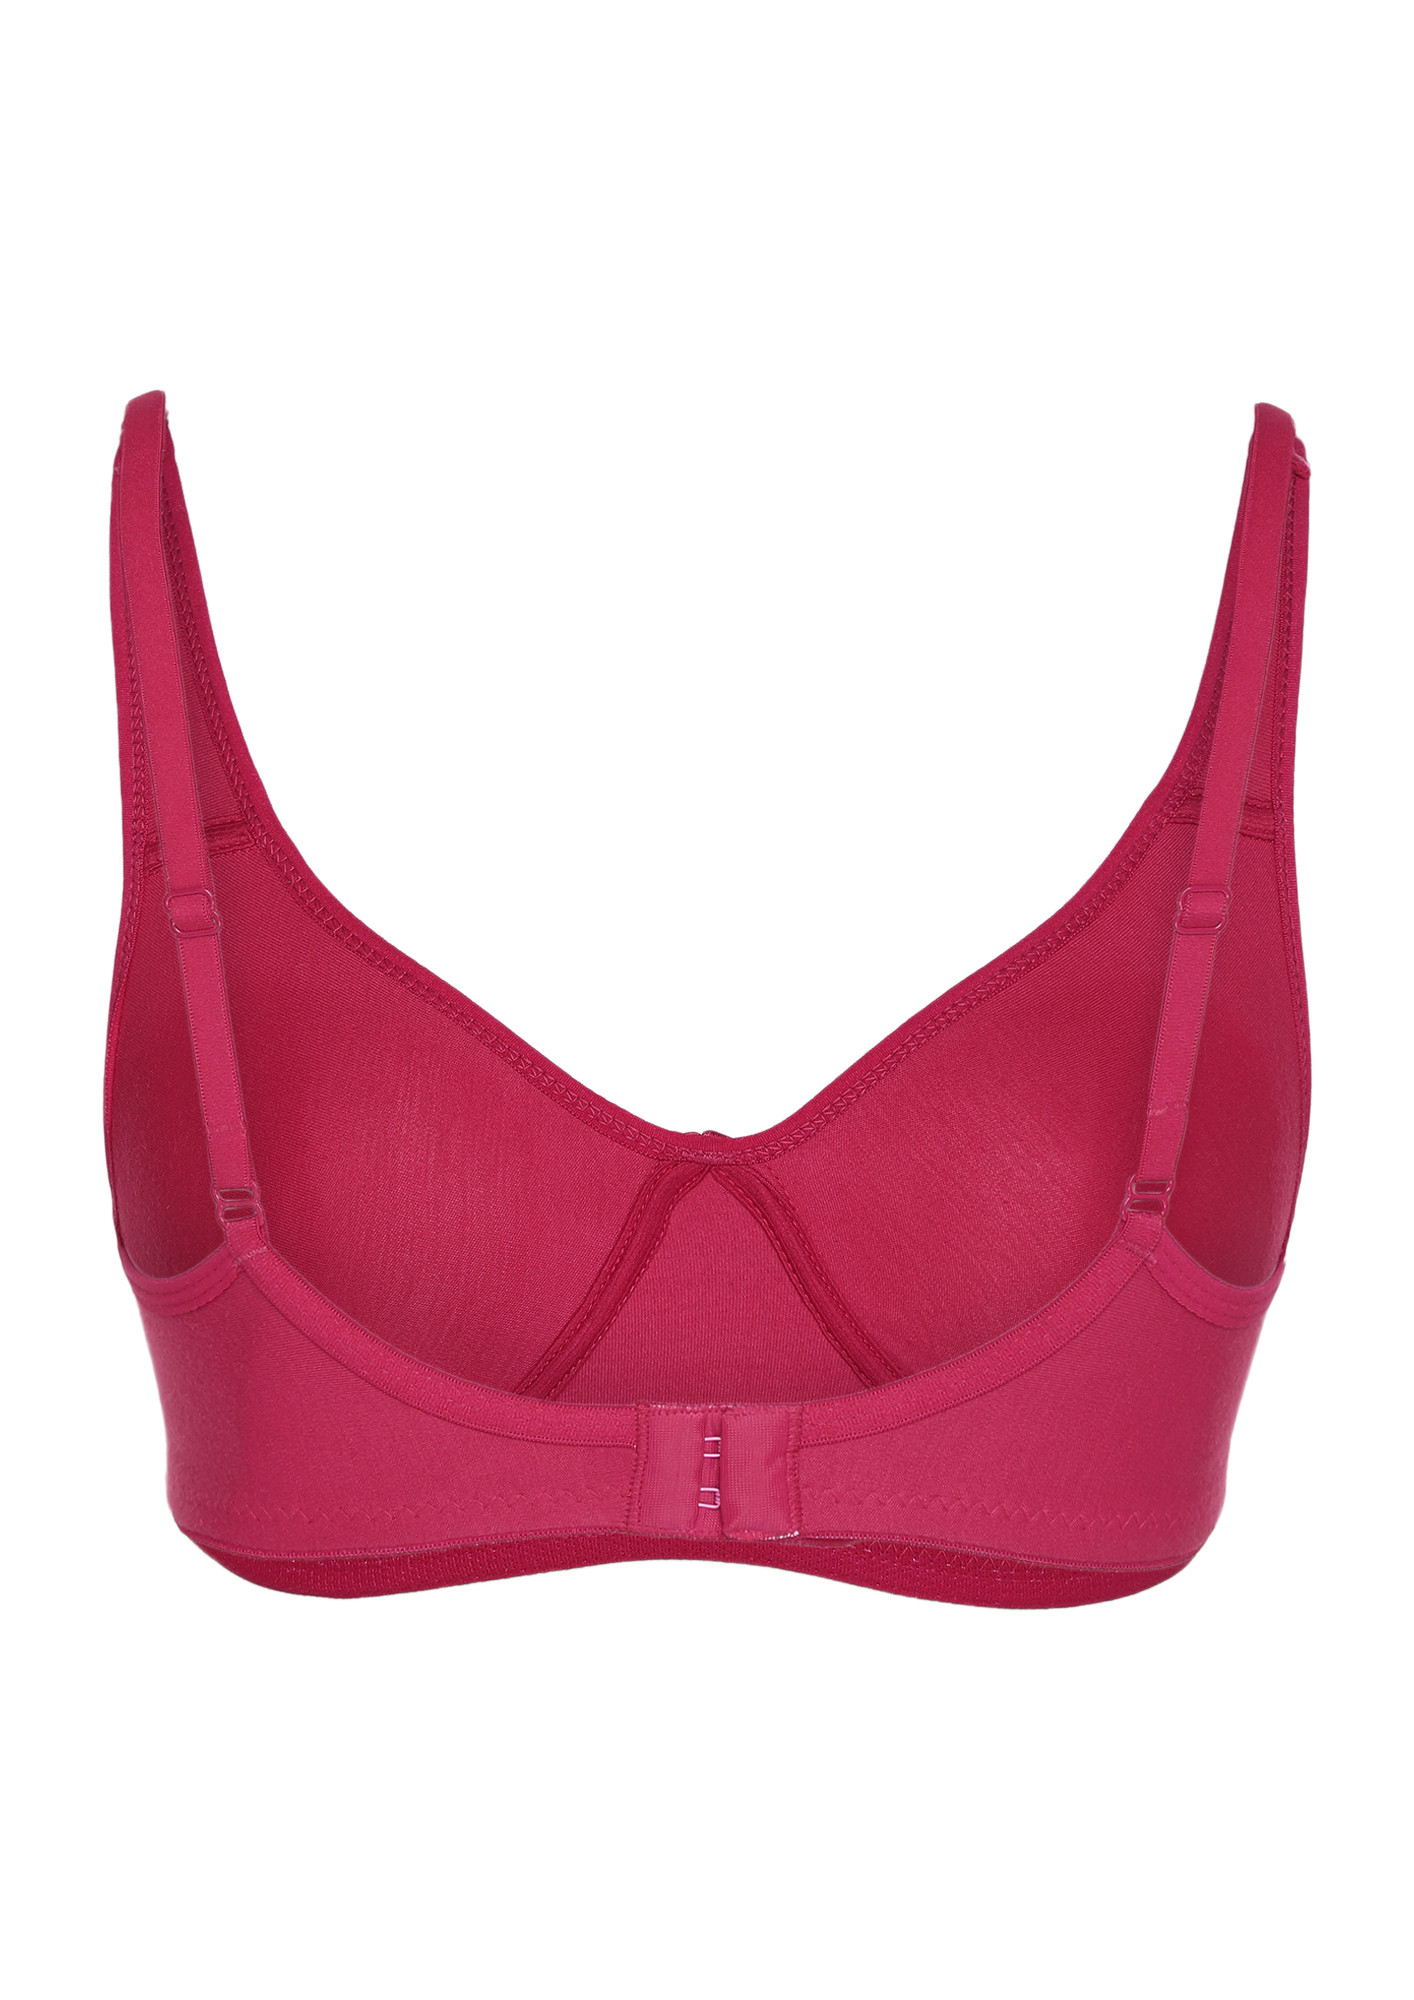 Her own words, STYLIST AIRY NON WIRED BRA, Color : Pink